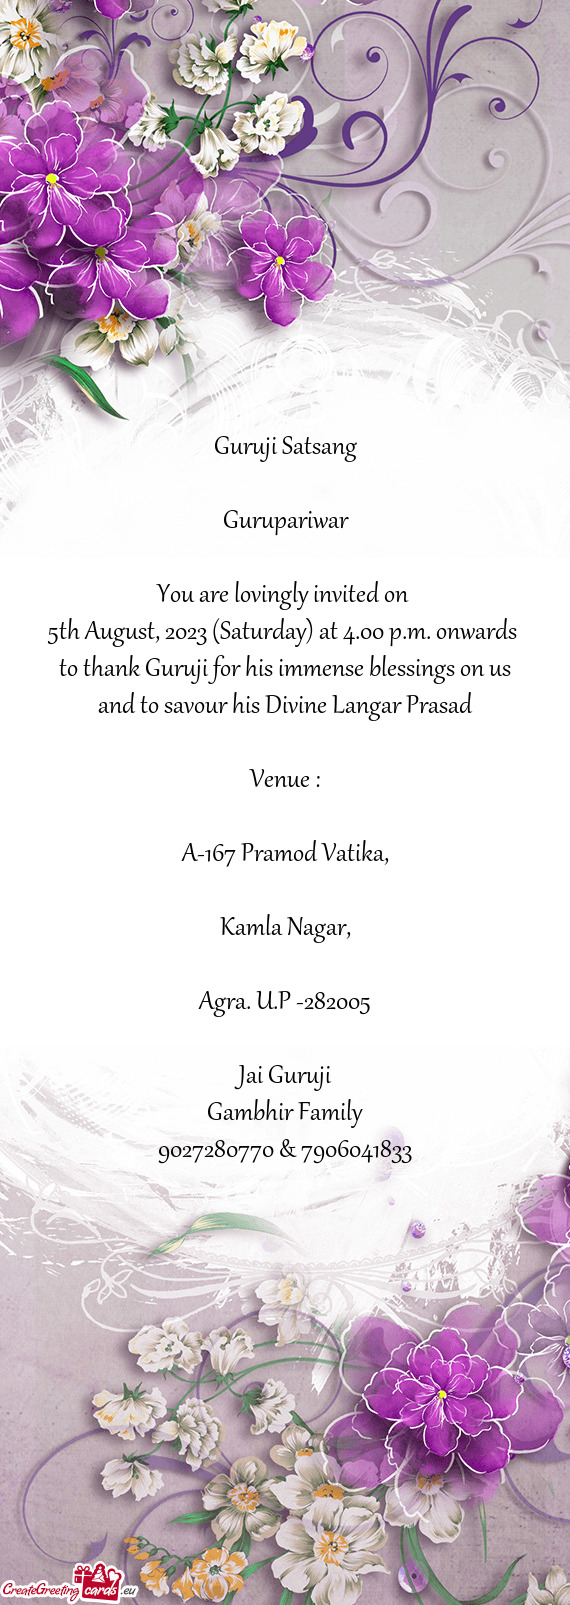 5th August, 2023 (Saturday) at 4.00 p.m. onwards